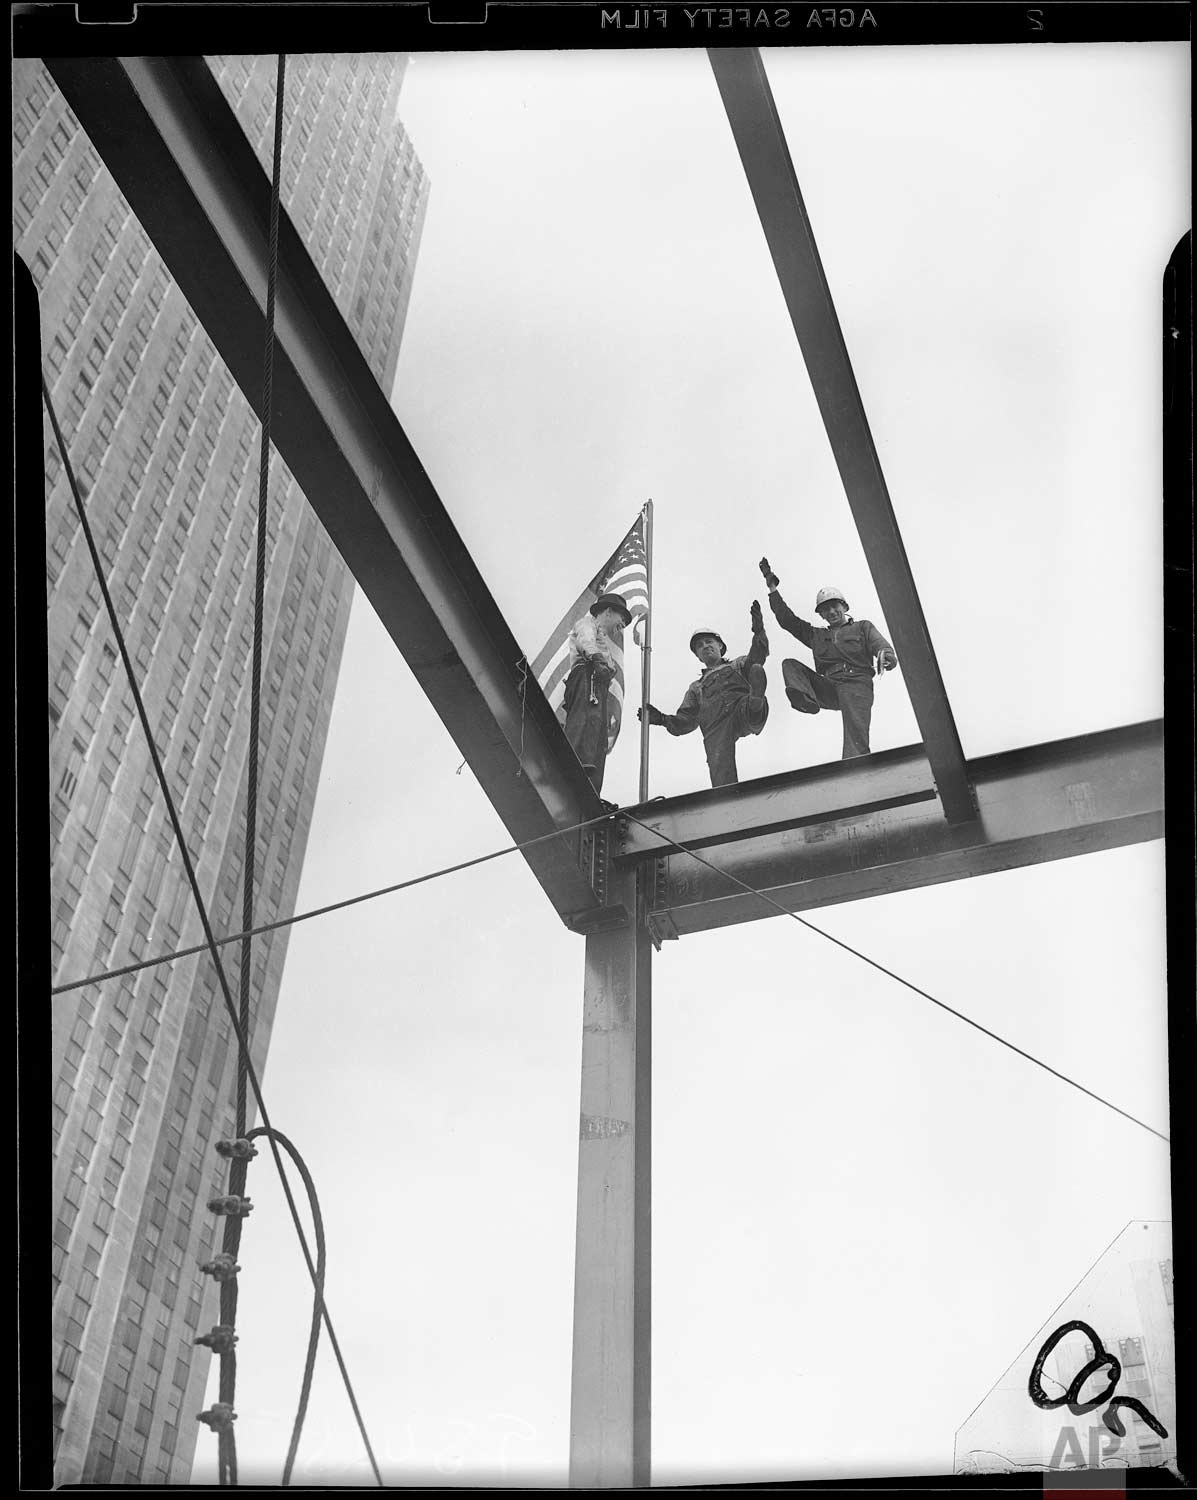  A "topping-out" ceremony - the raising of an American flag on the topmost girder - marked the completion of the steelwork on the 15-story new Associated Press building at Rockefeller Center, New York, June 16, 1938. (AP Photo/Corporate Archives/Jose